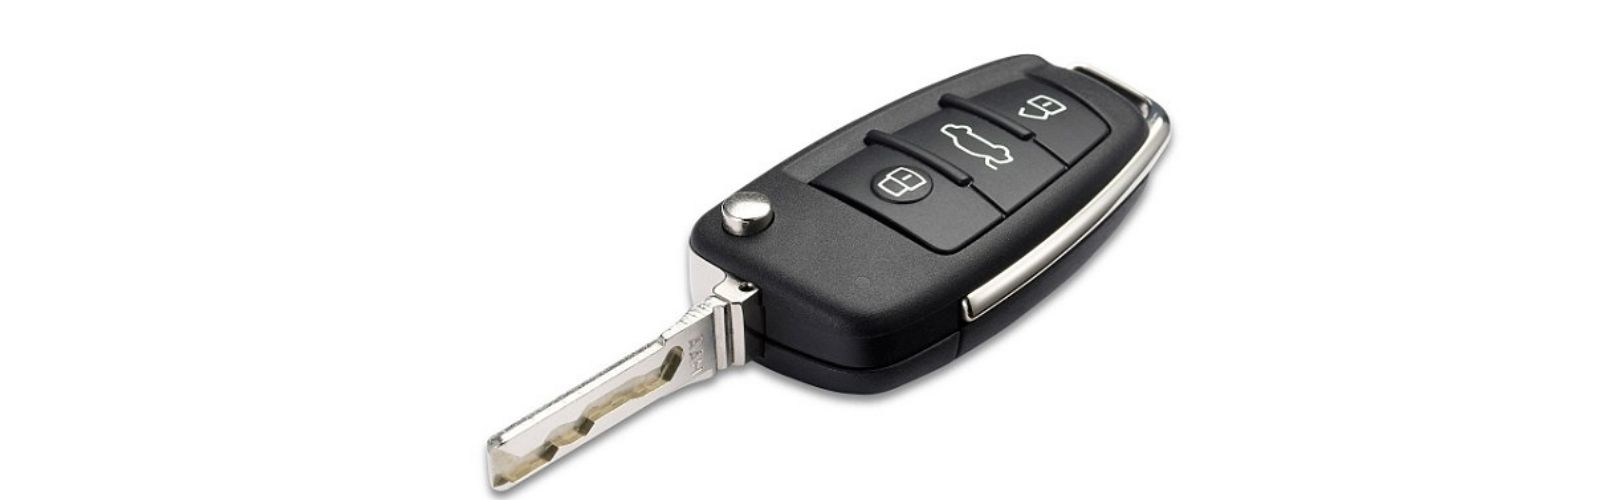 How much does a replacement car key cost?